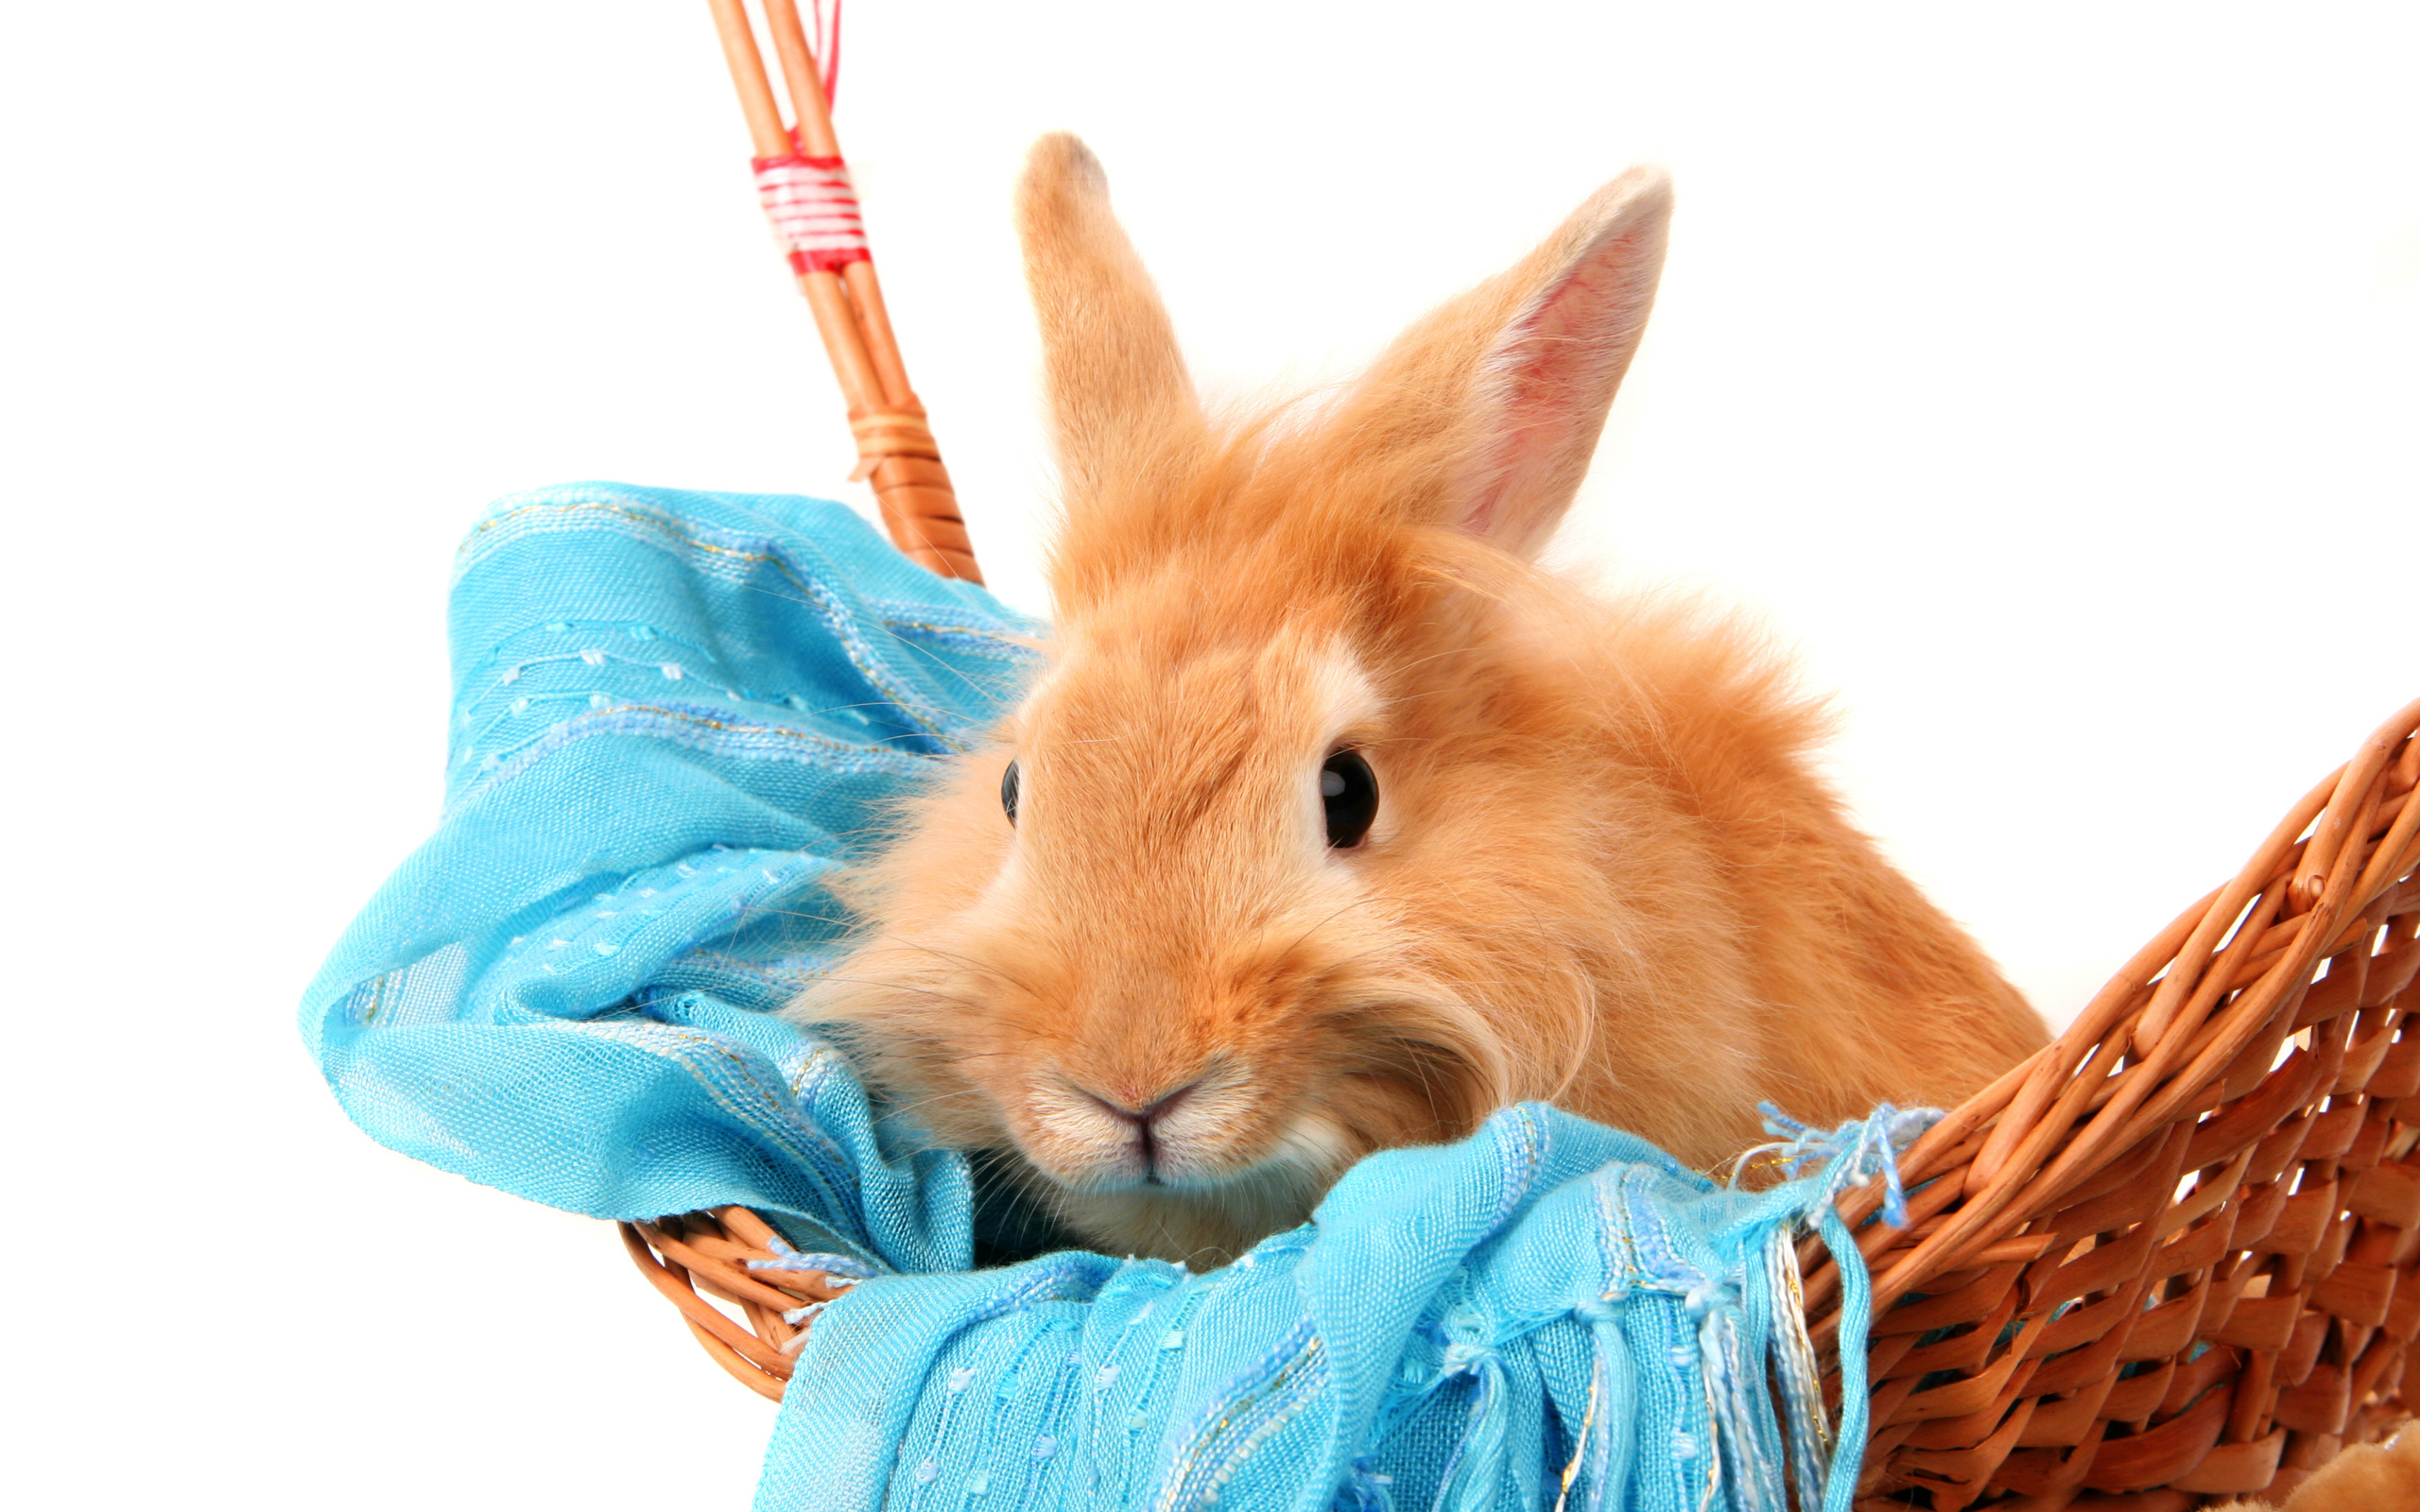 Red-haired furry rabbit sitting in a basket on a blue scarf on a white background